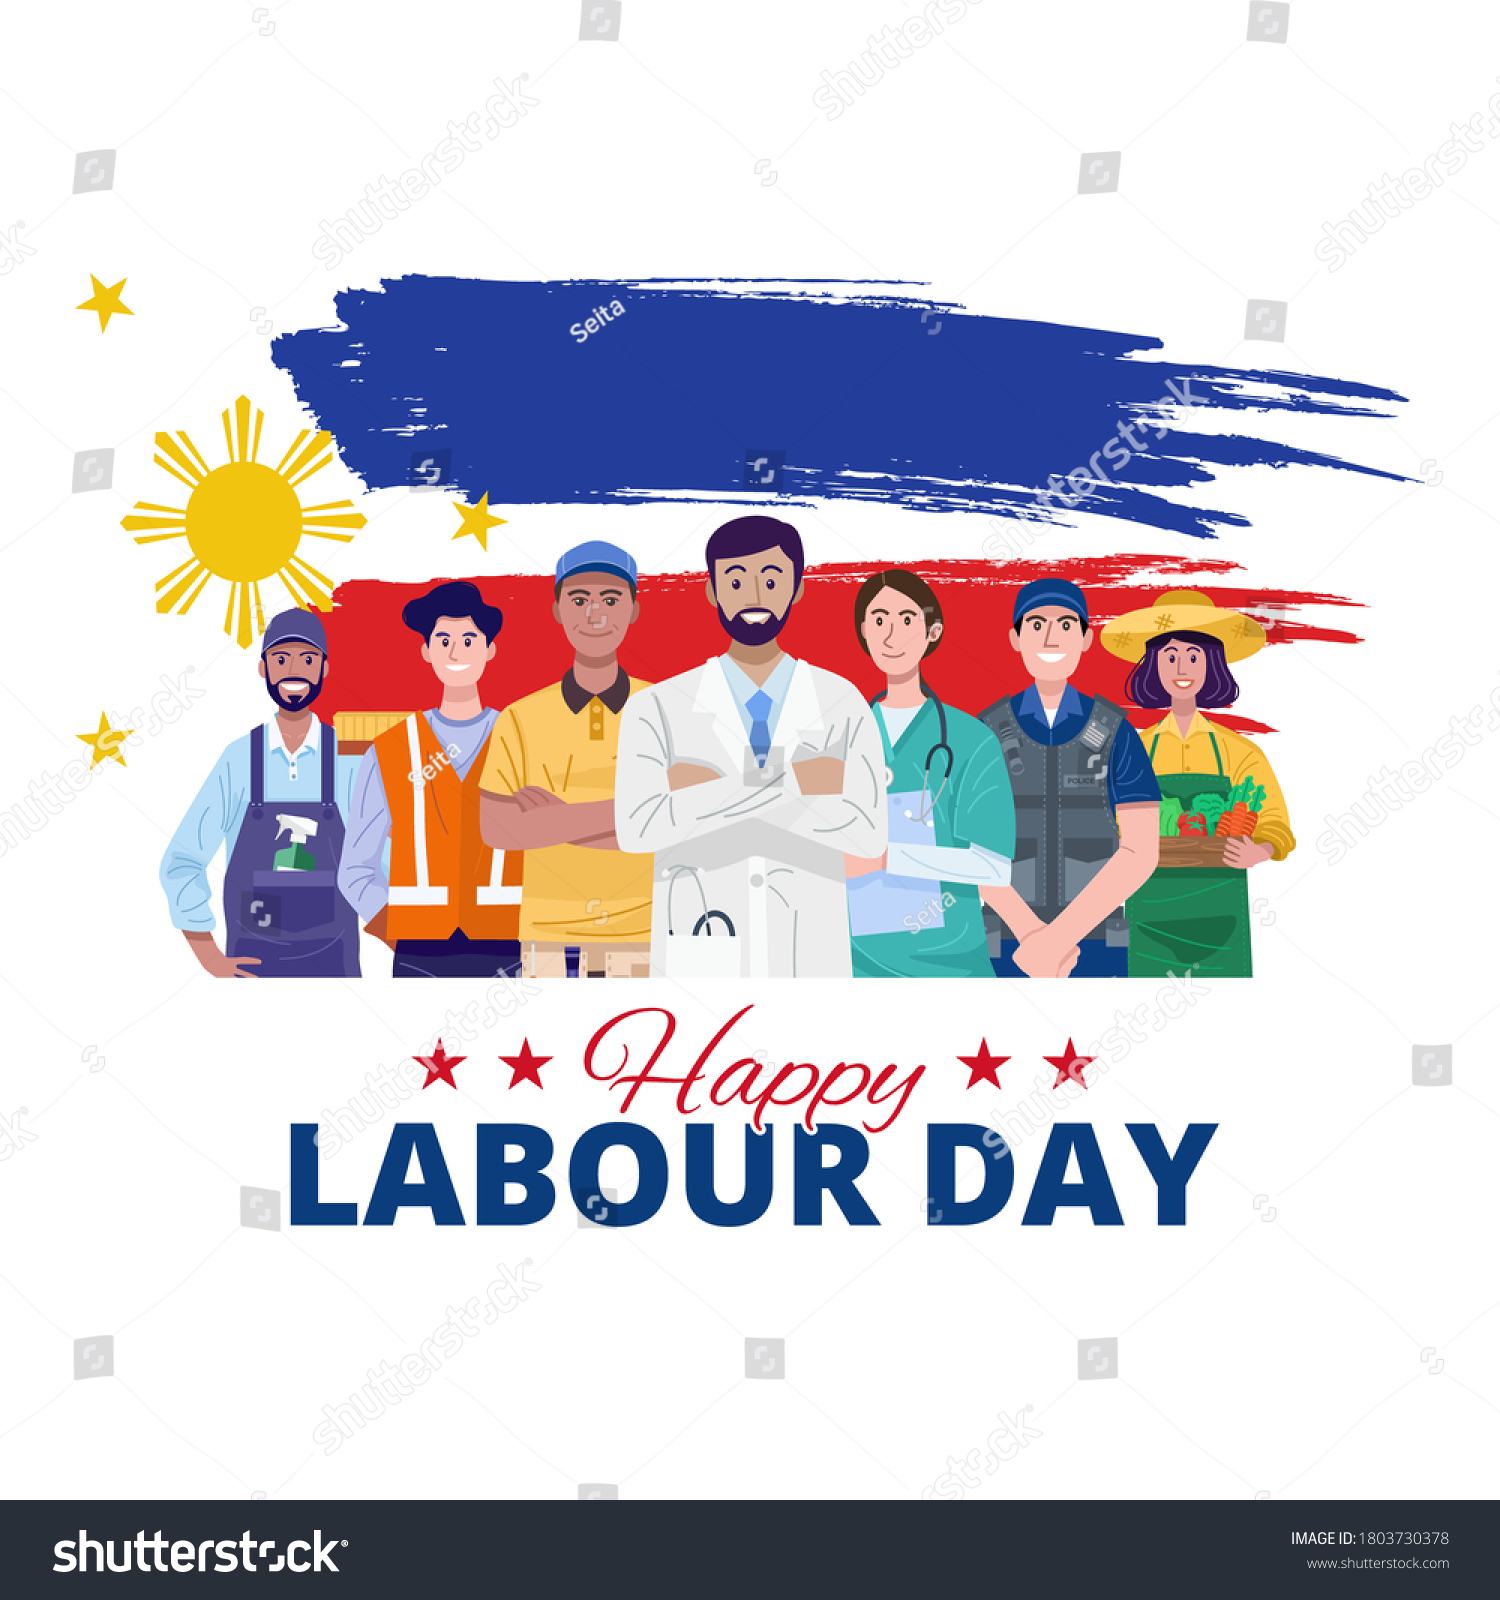 1,038 Labor day garbage Images, Stock Photos & Vectors Shutterstock